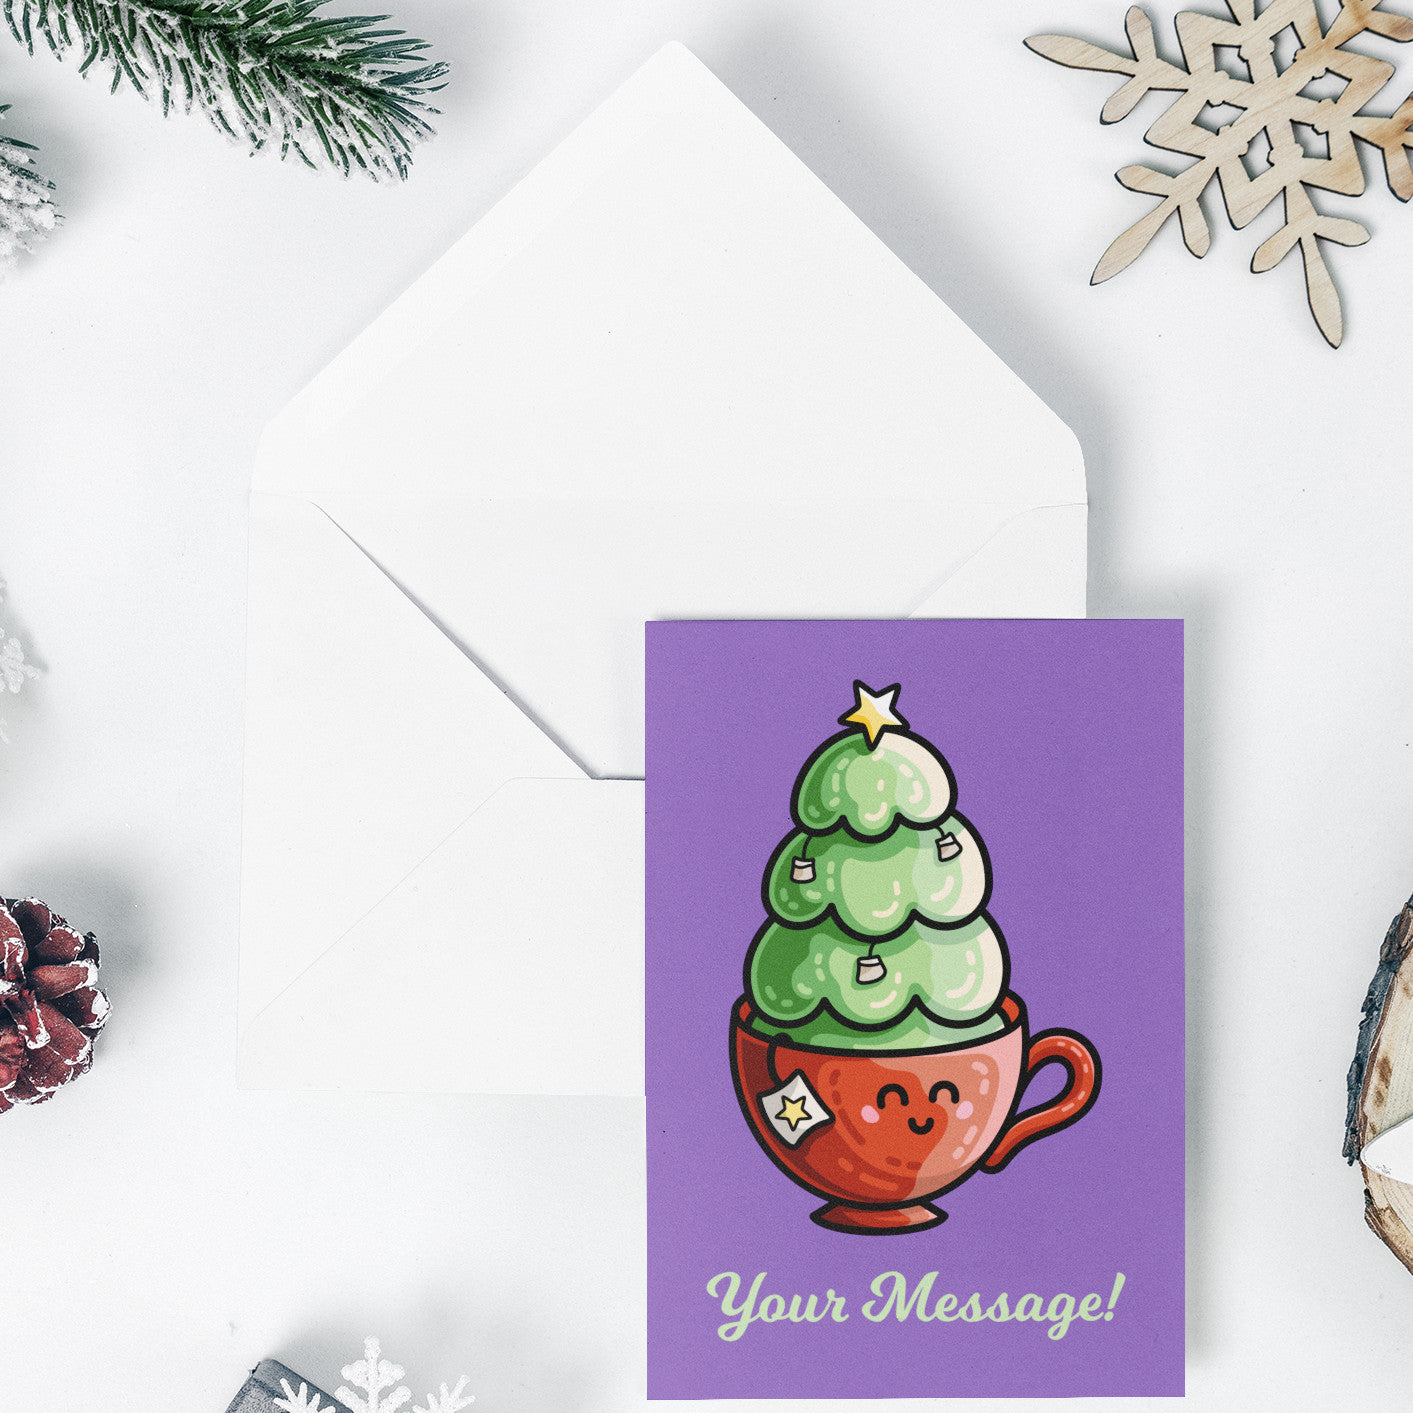 An open white envelope beneath a purple greeting card with a design of a cute red teacup with a Christmas tree planted in it decorated with hanging teabags